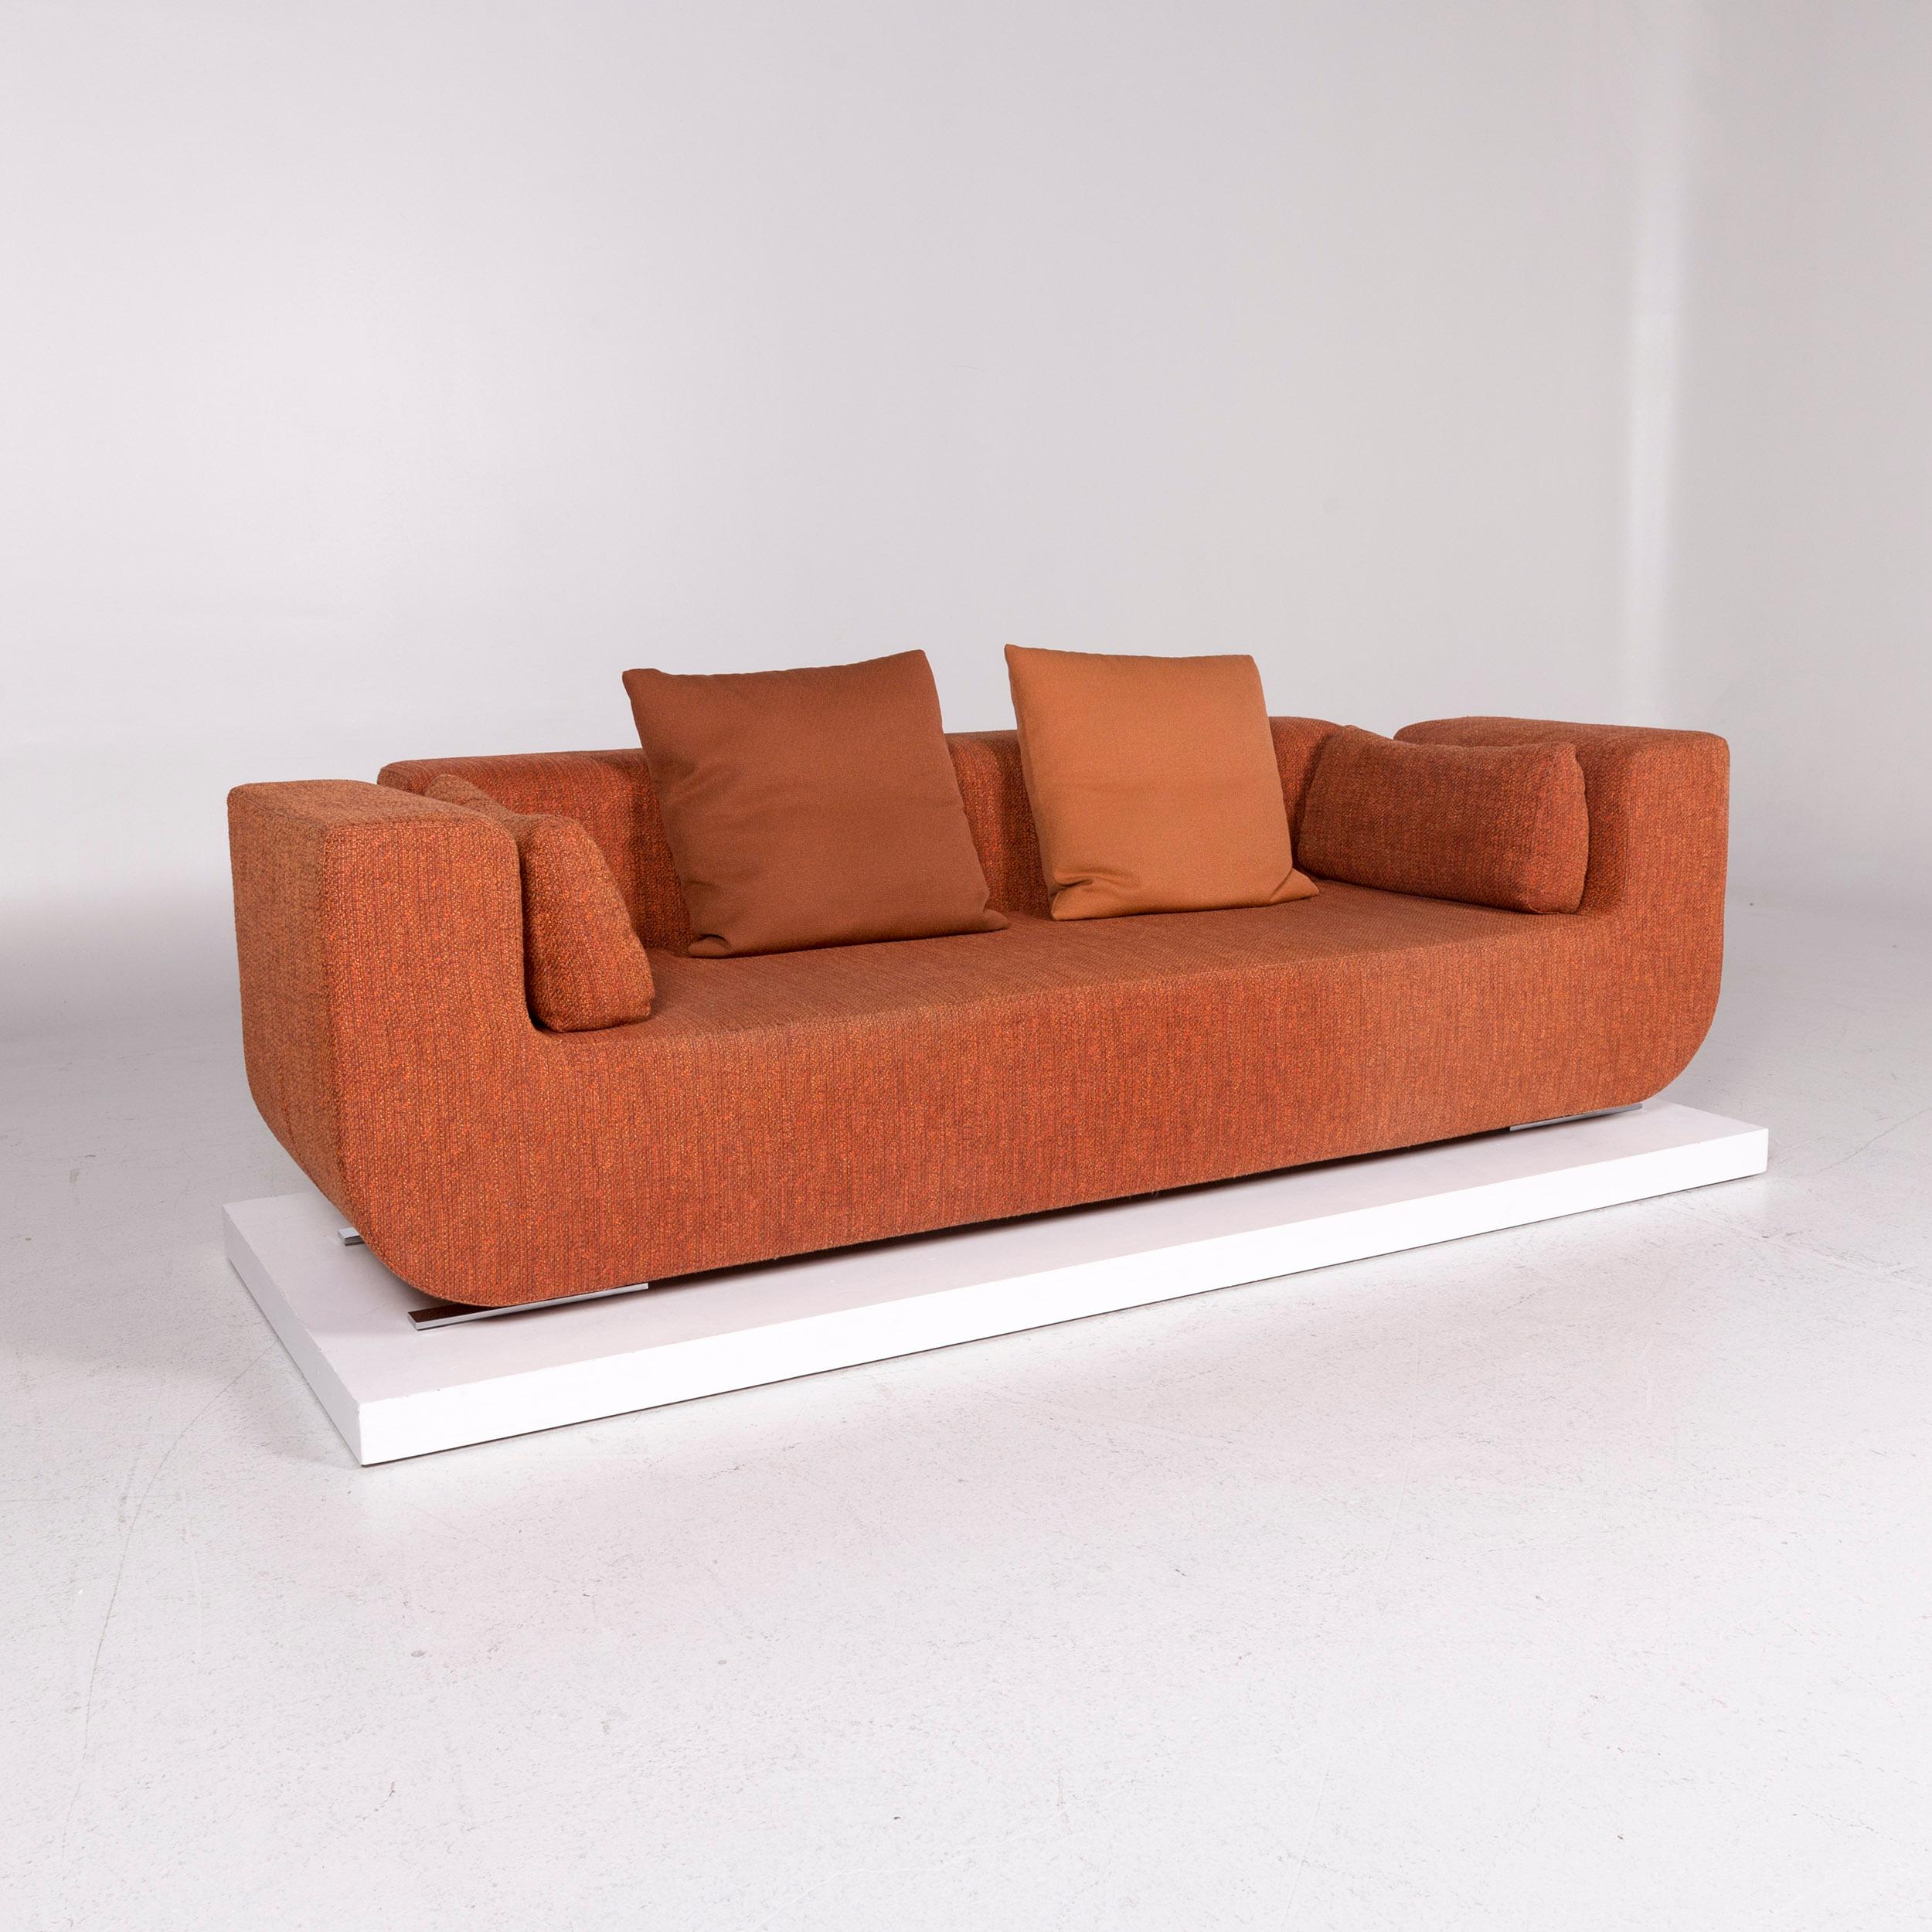 We bring to you a COR Nuba orange fabric sofa set 1 three-seat 1 stool.

 

 Product measurements in centimeters:
 

Depth 97
Width 250
Height 78
Seat-height 40
Rest-height 70
Seat-depth 50
Seat-width 162
Back-height 37.